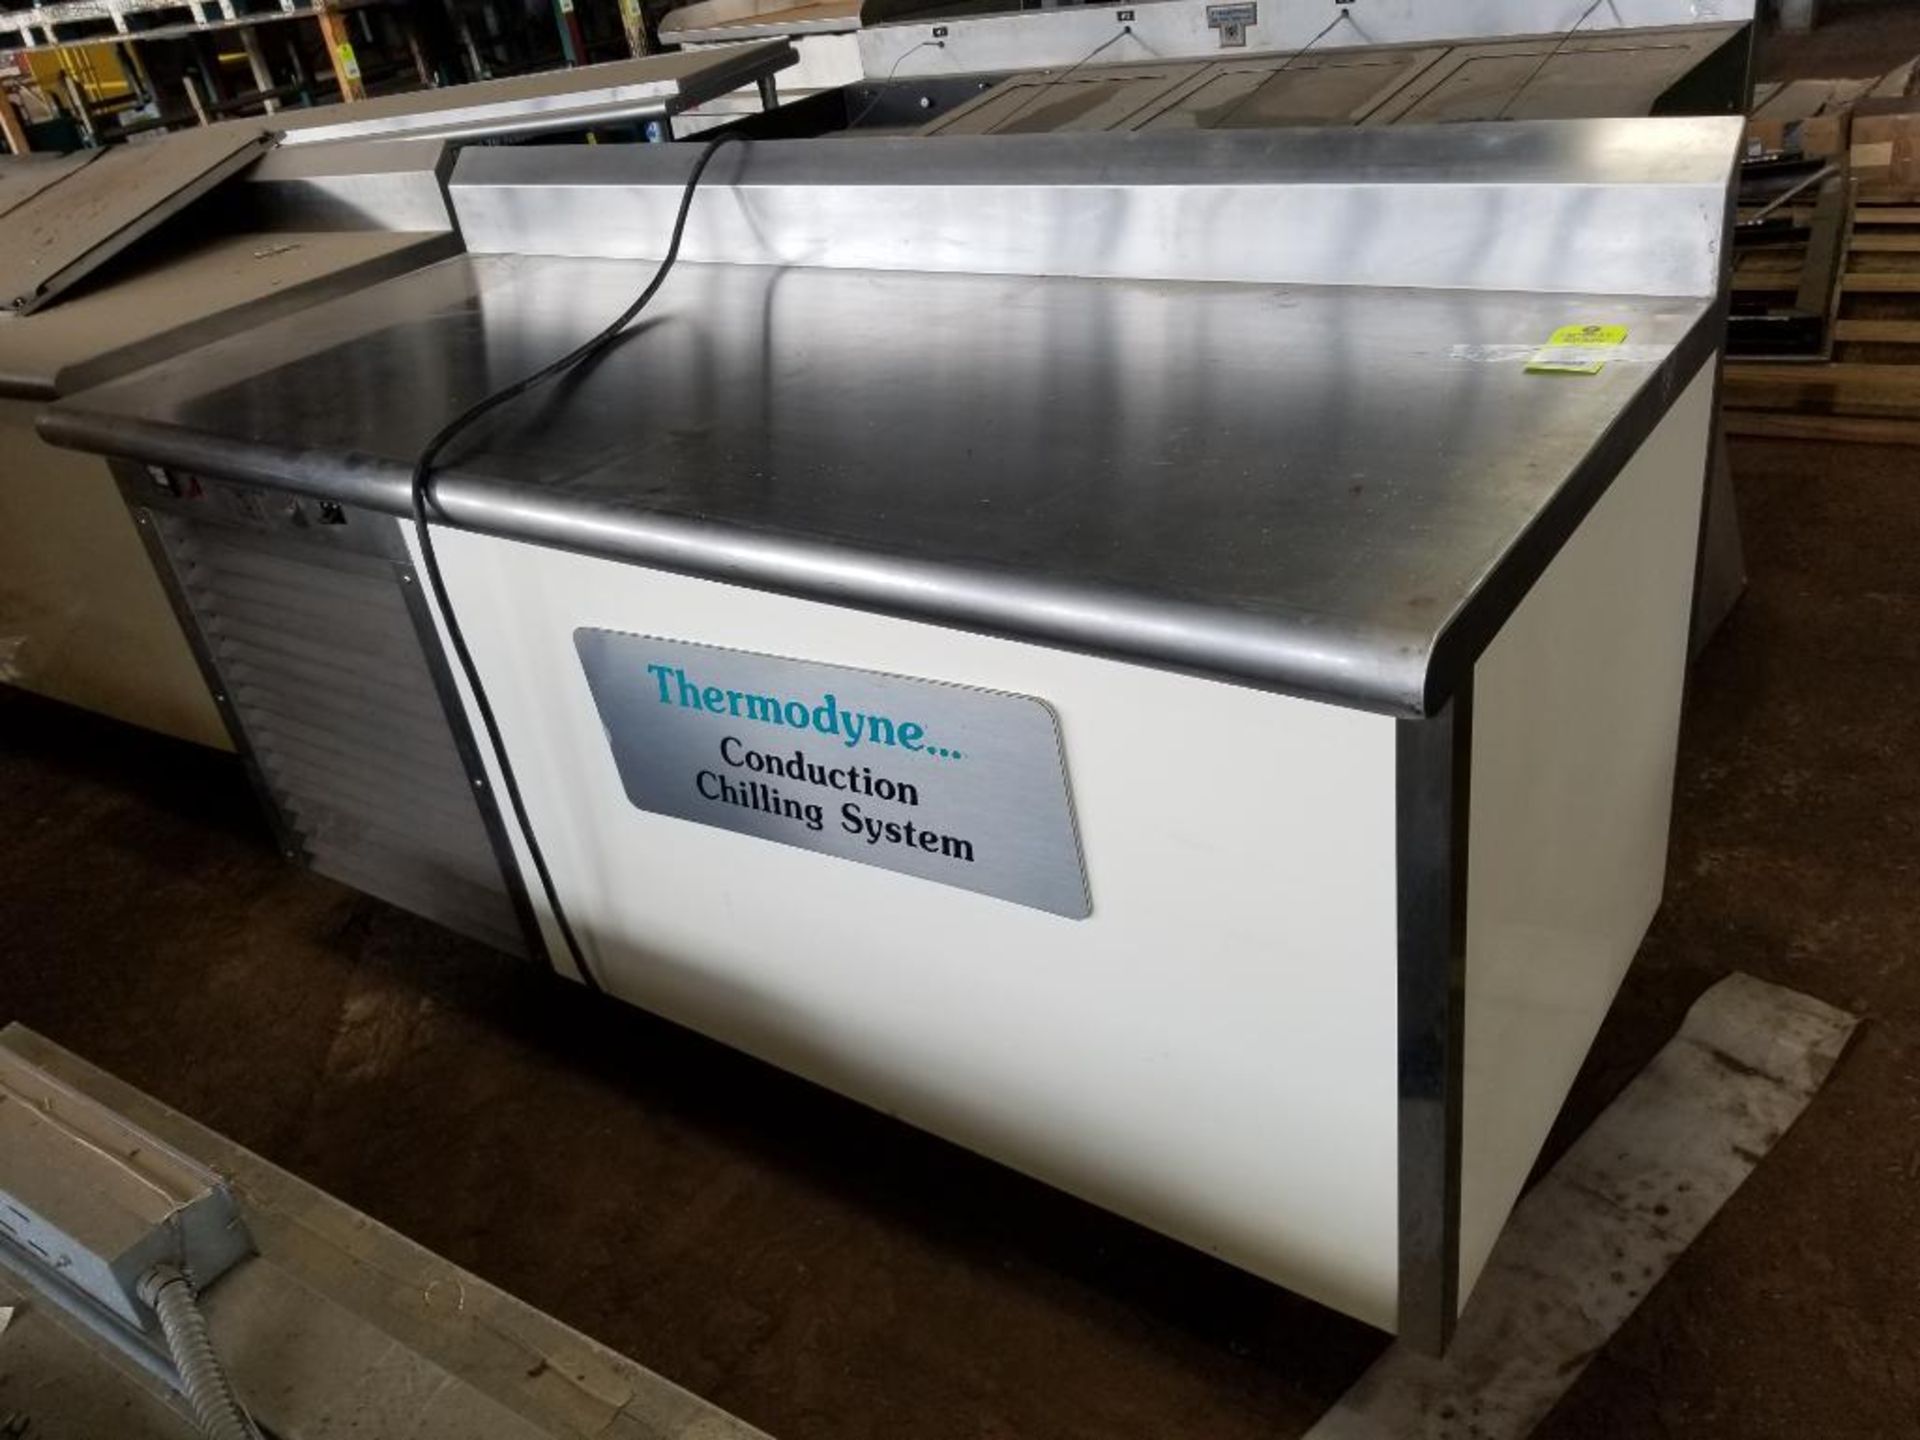 Thermodyne Foodservice Conduction chilling stystem unit. 73x36x43. LxWxH.